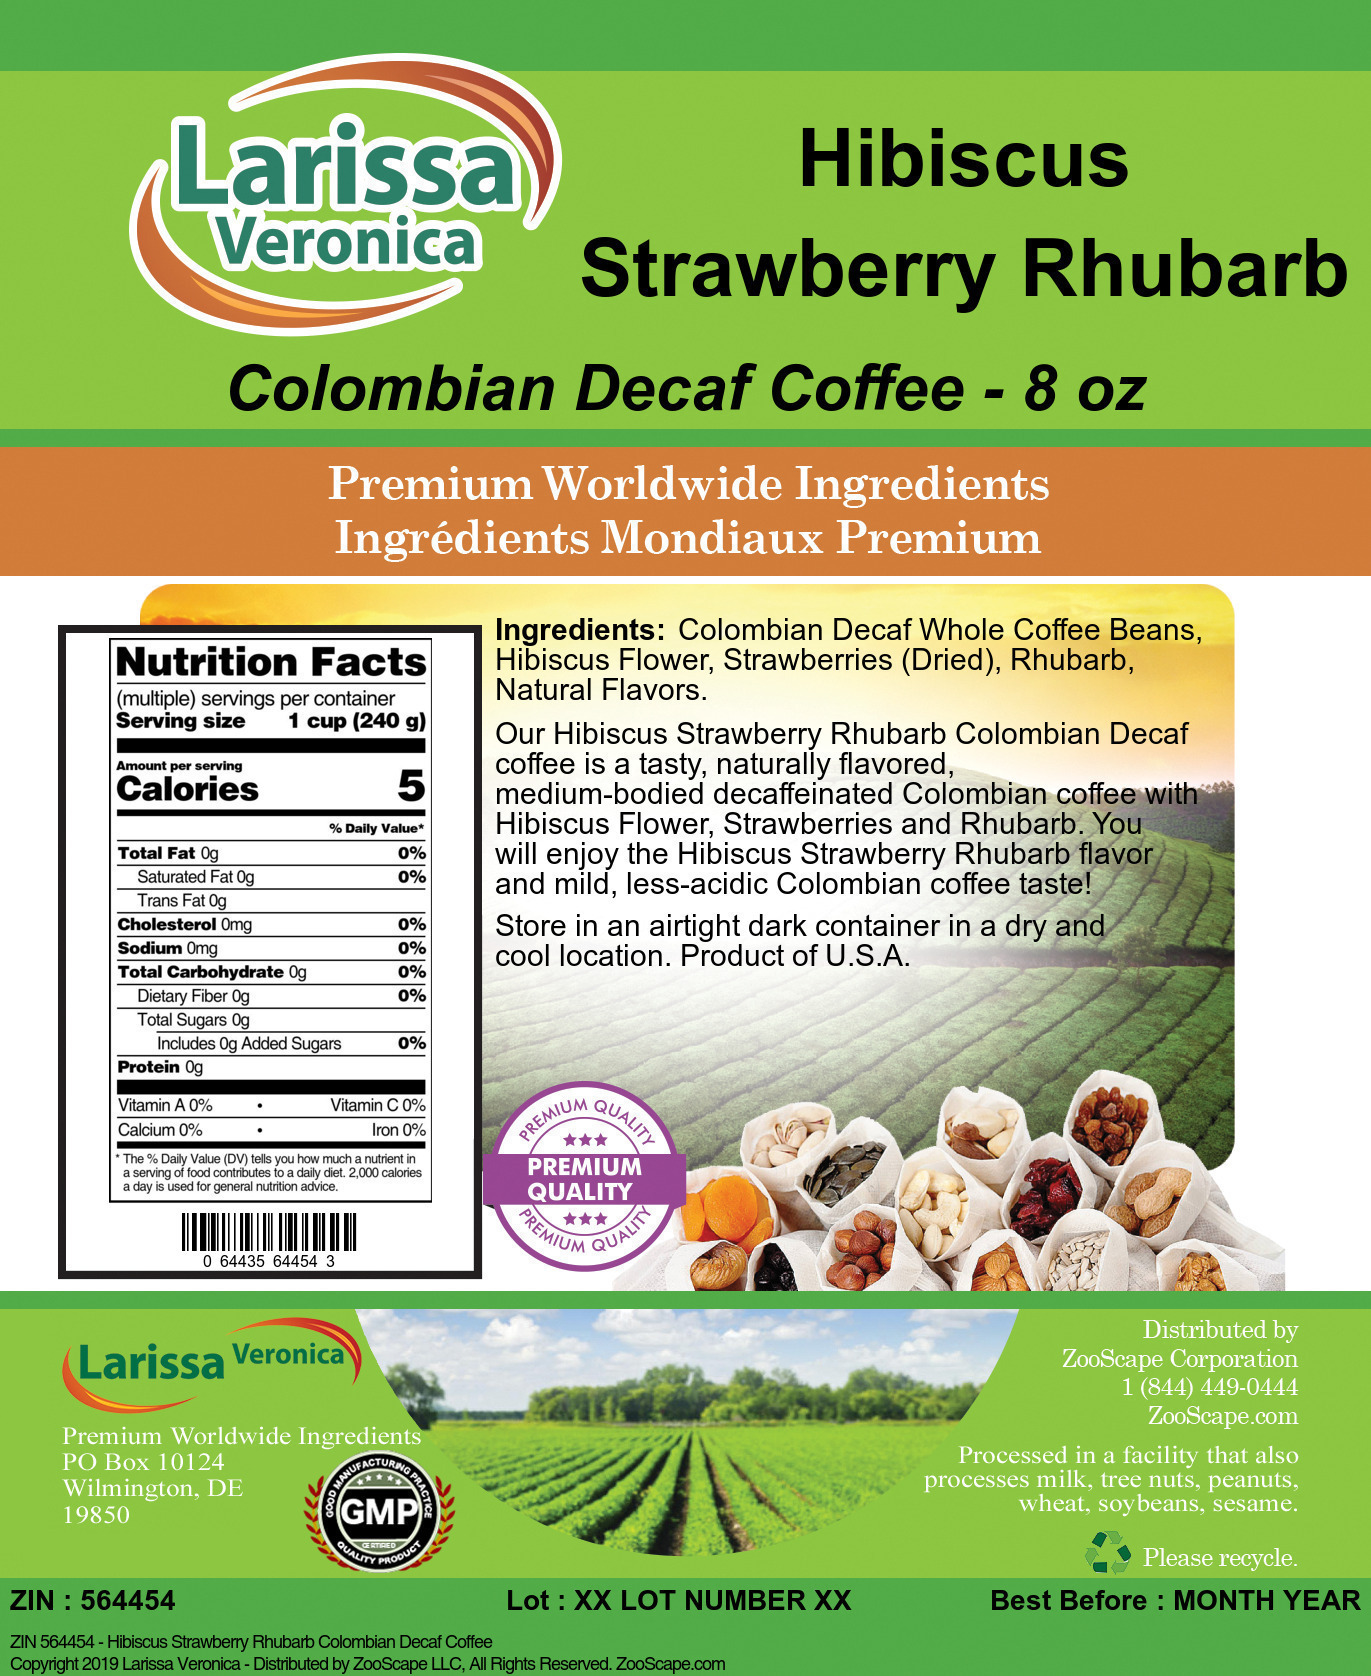 Hibiscus Strawberry Rhubarb Colombian Decaf Coffee - Label